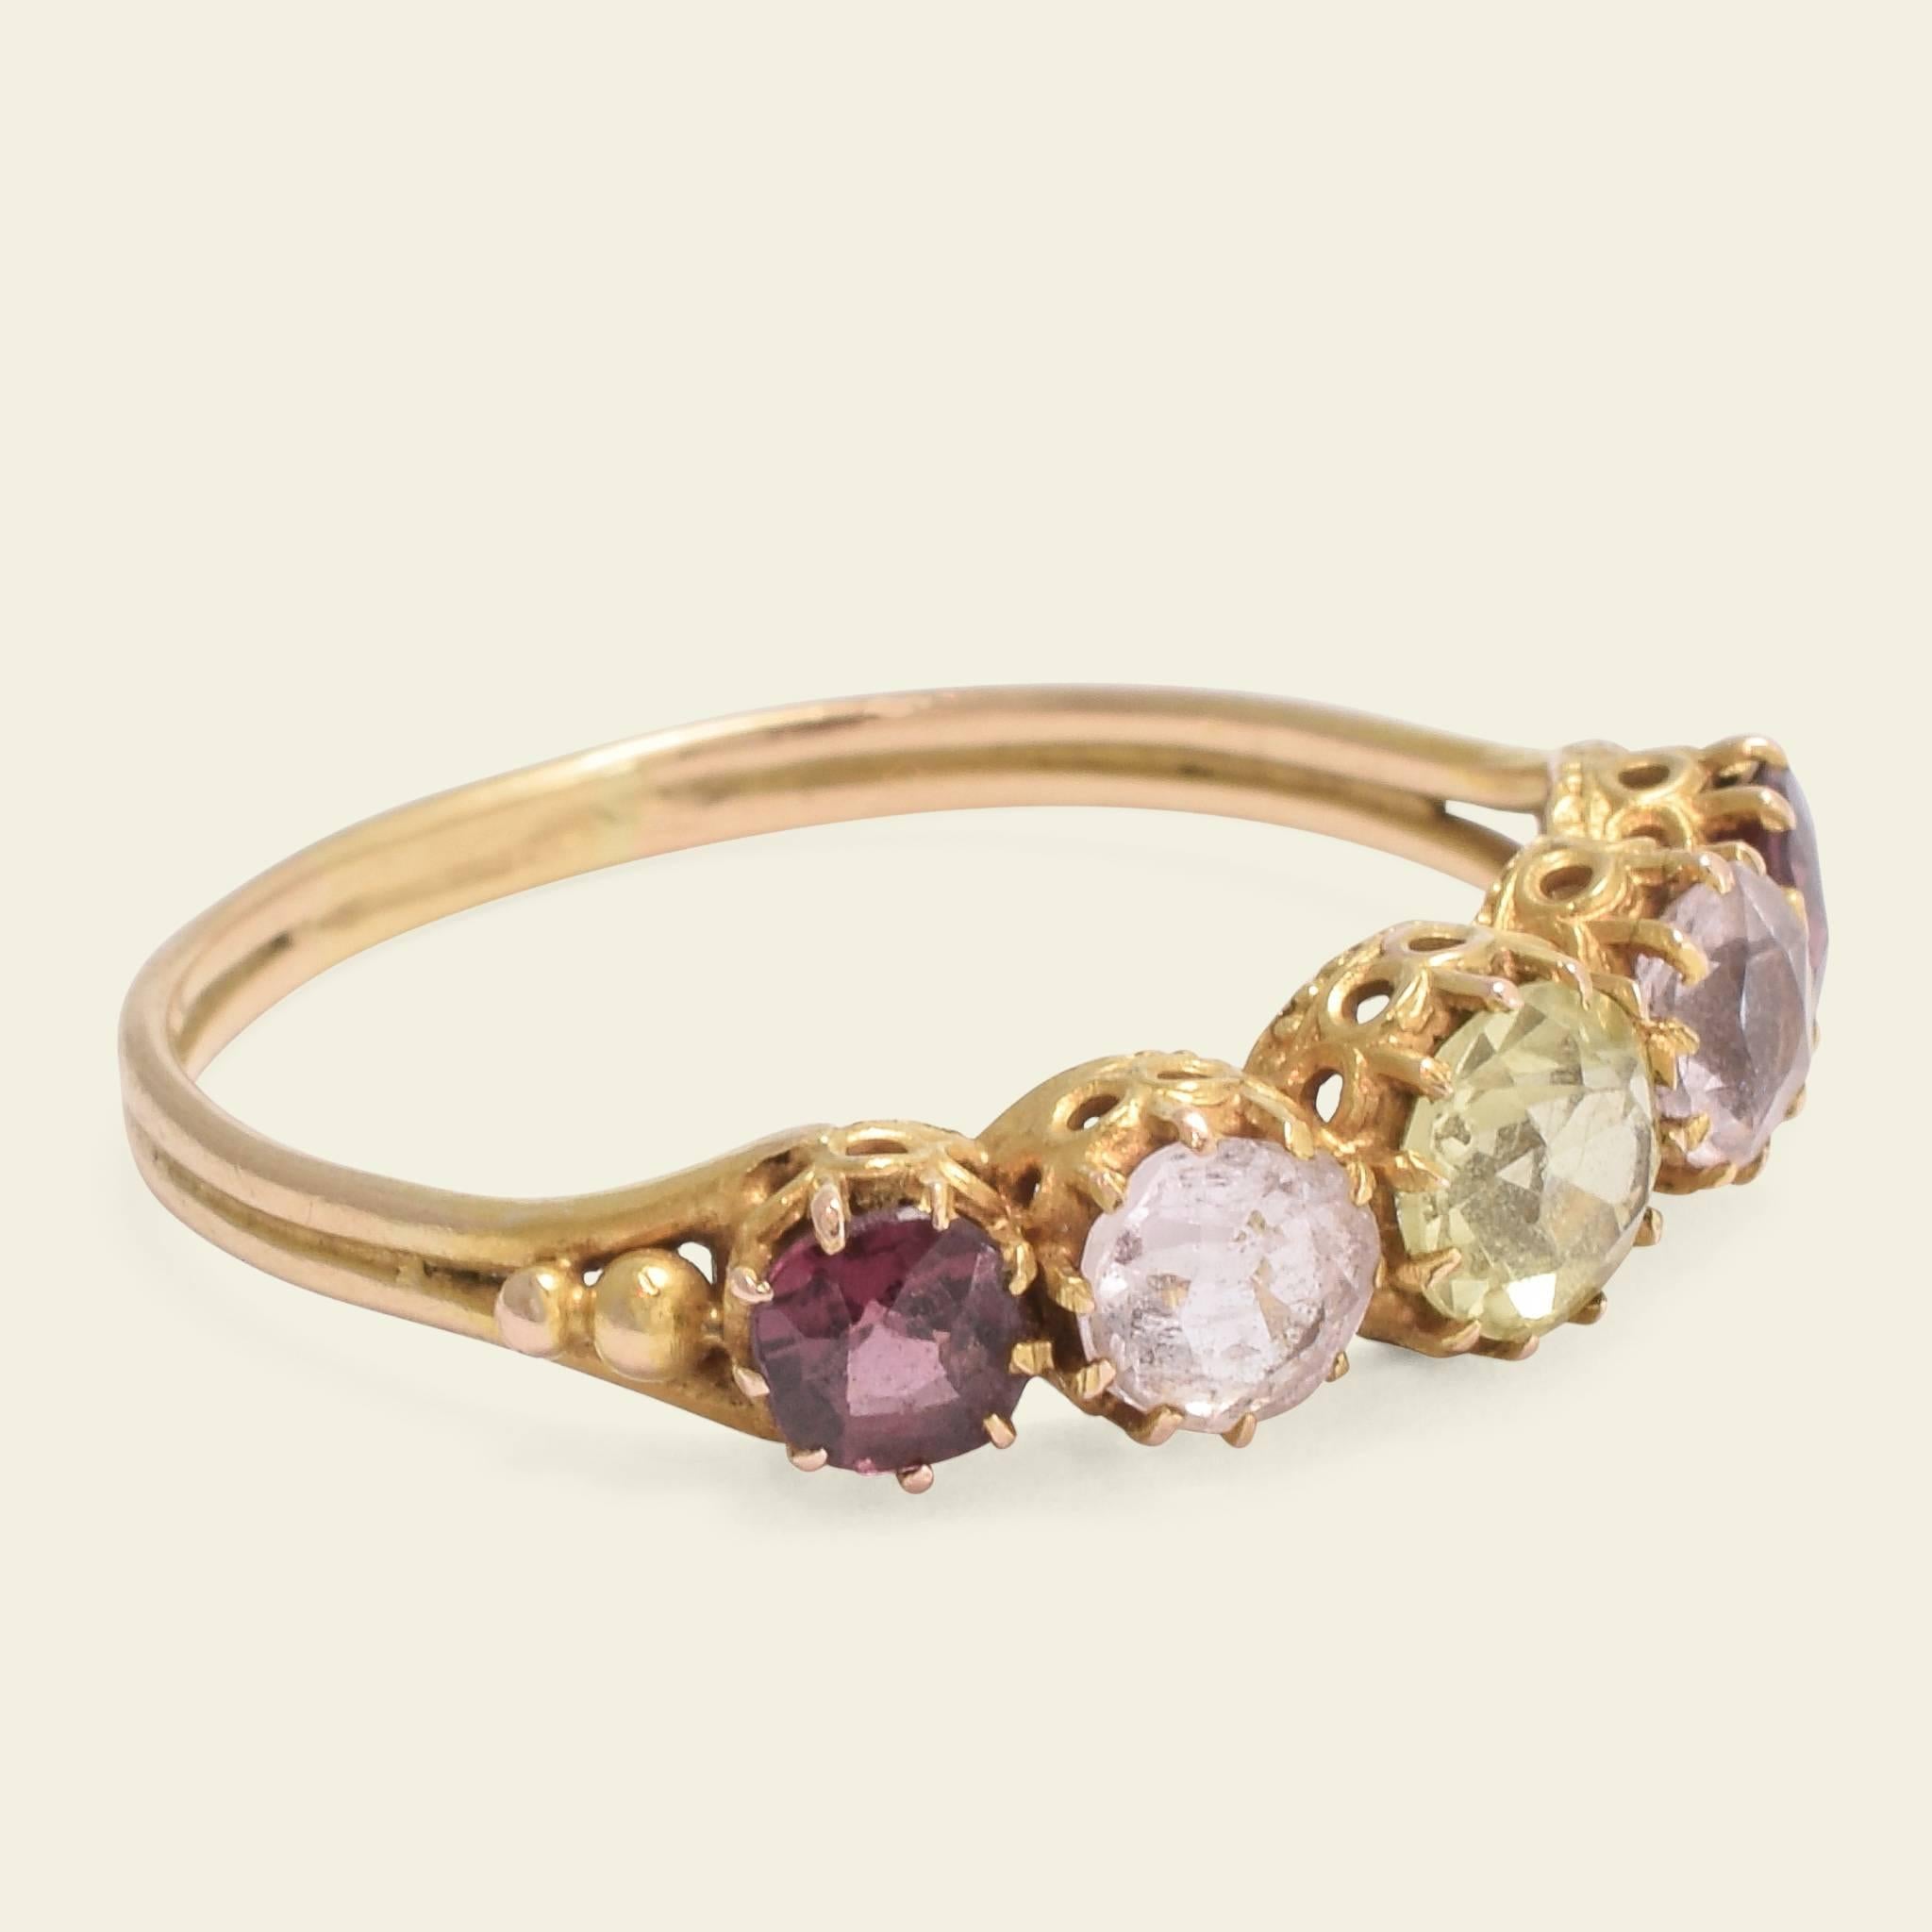 This pretty multi-colored five stone ring is fashioned in 18k yellow gold and dates to the mid Victorian period. The ring is set with purplish almandine garnets, ultra pale amethysts, and a single chrysoberyl. The gems are prong-set above a